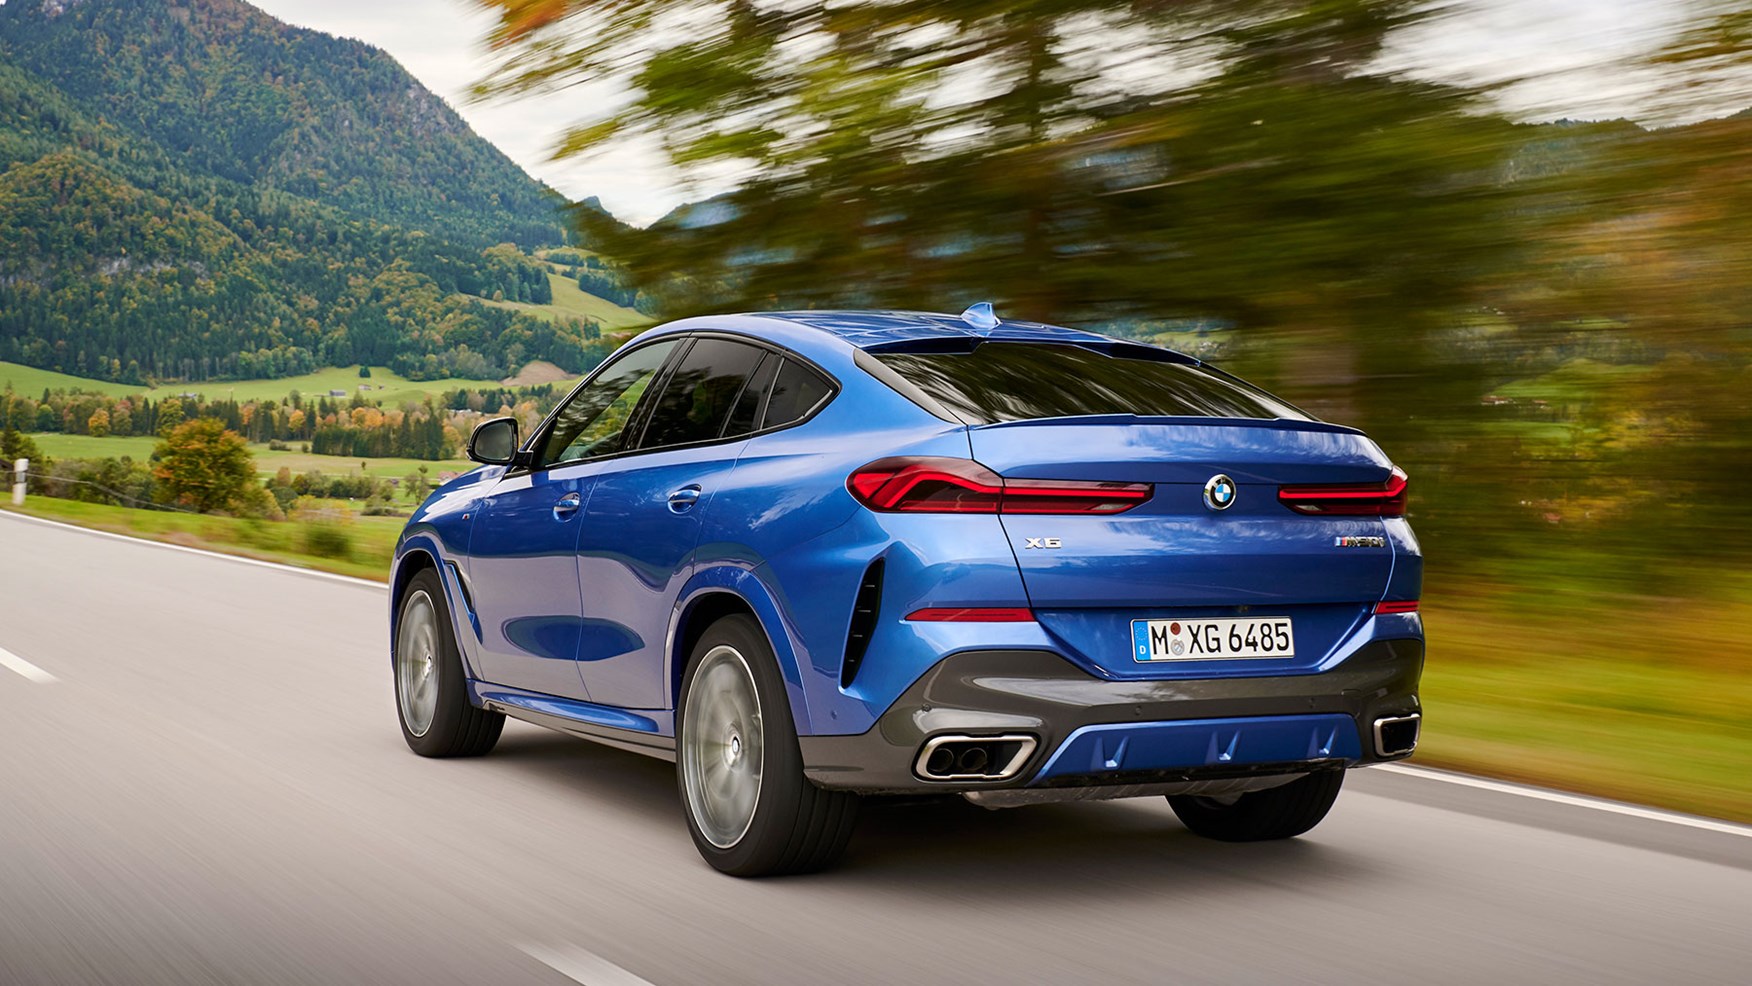 BMW X6 review: the Marmite SUV comes of age | CAR Magazine